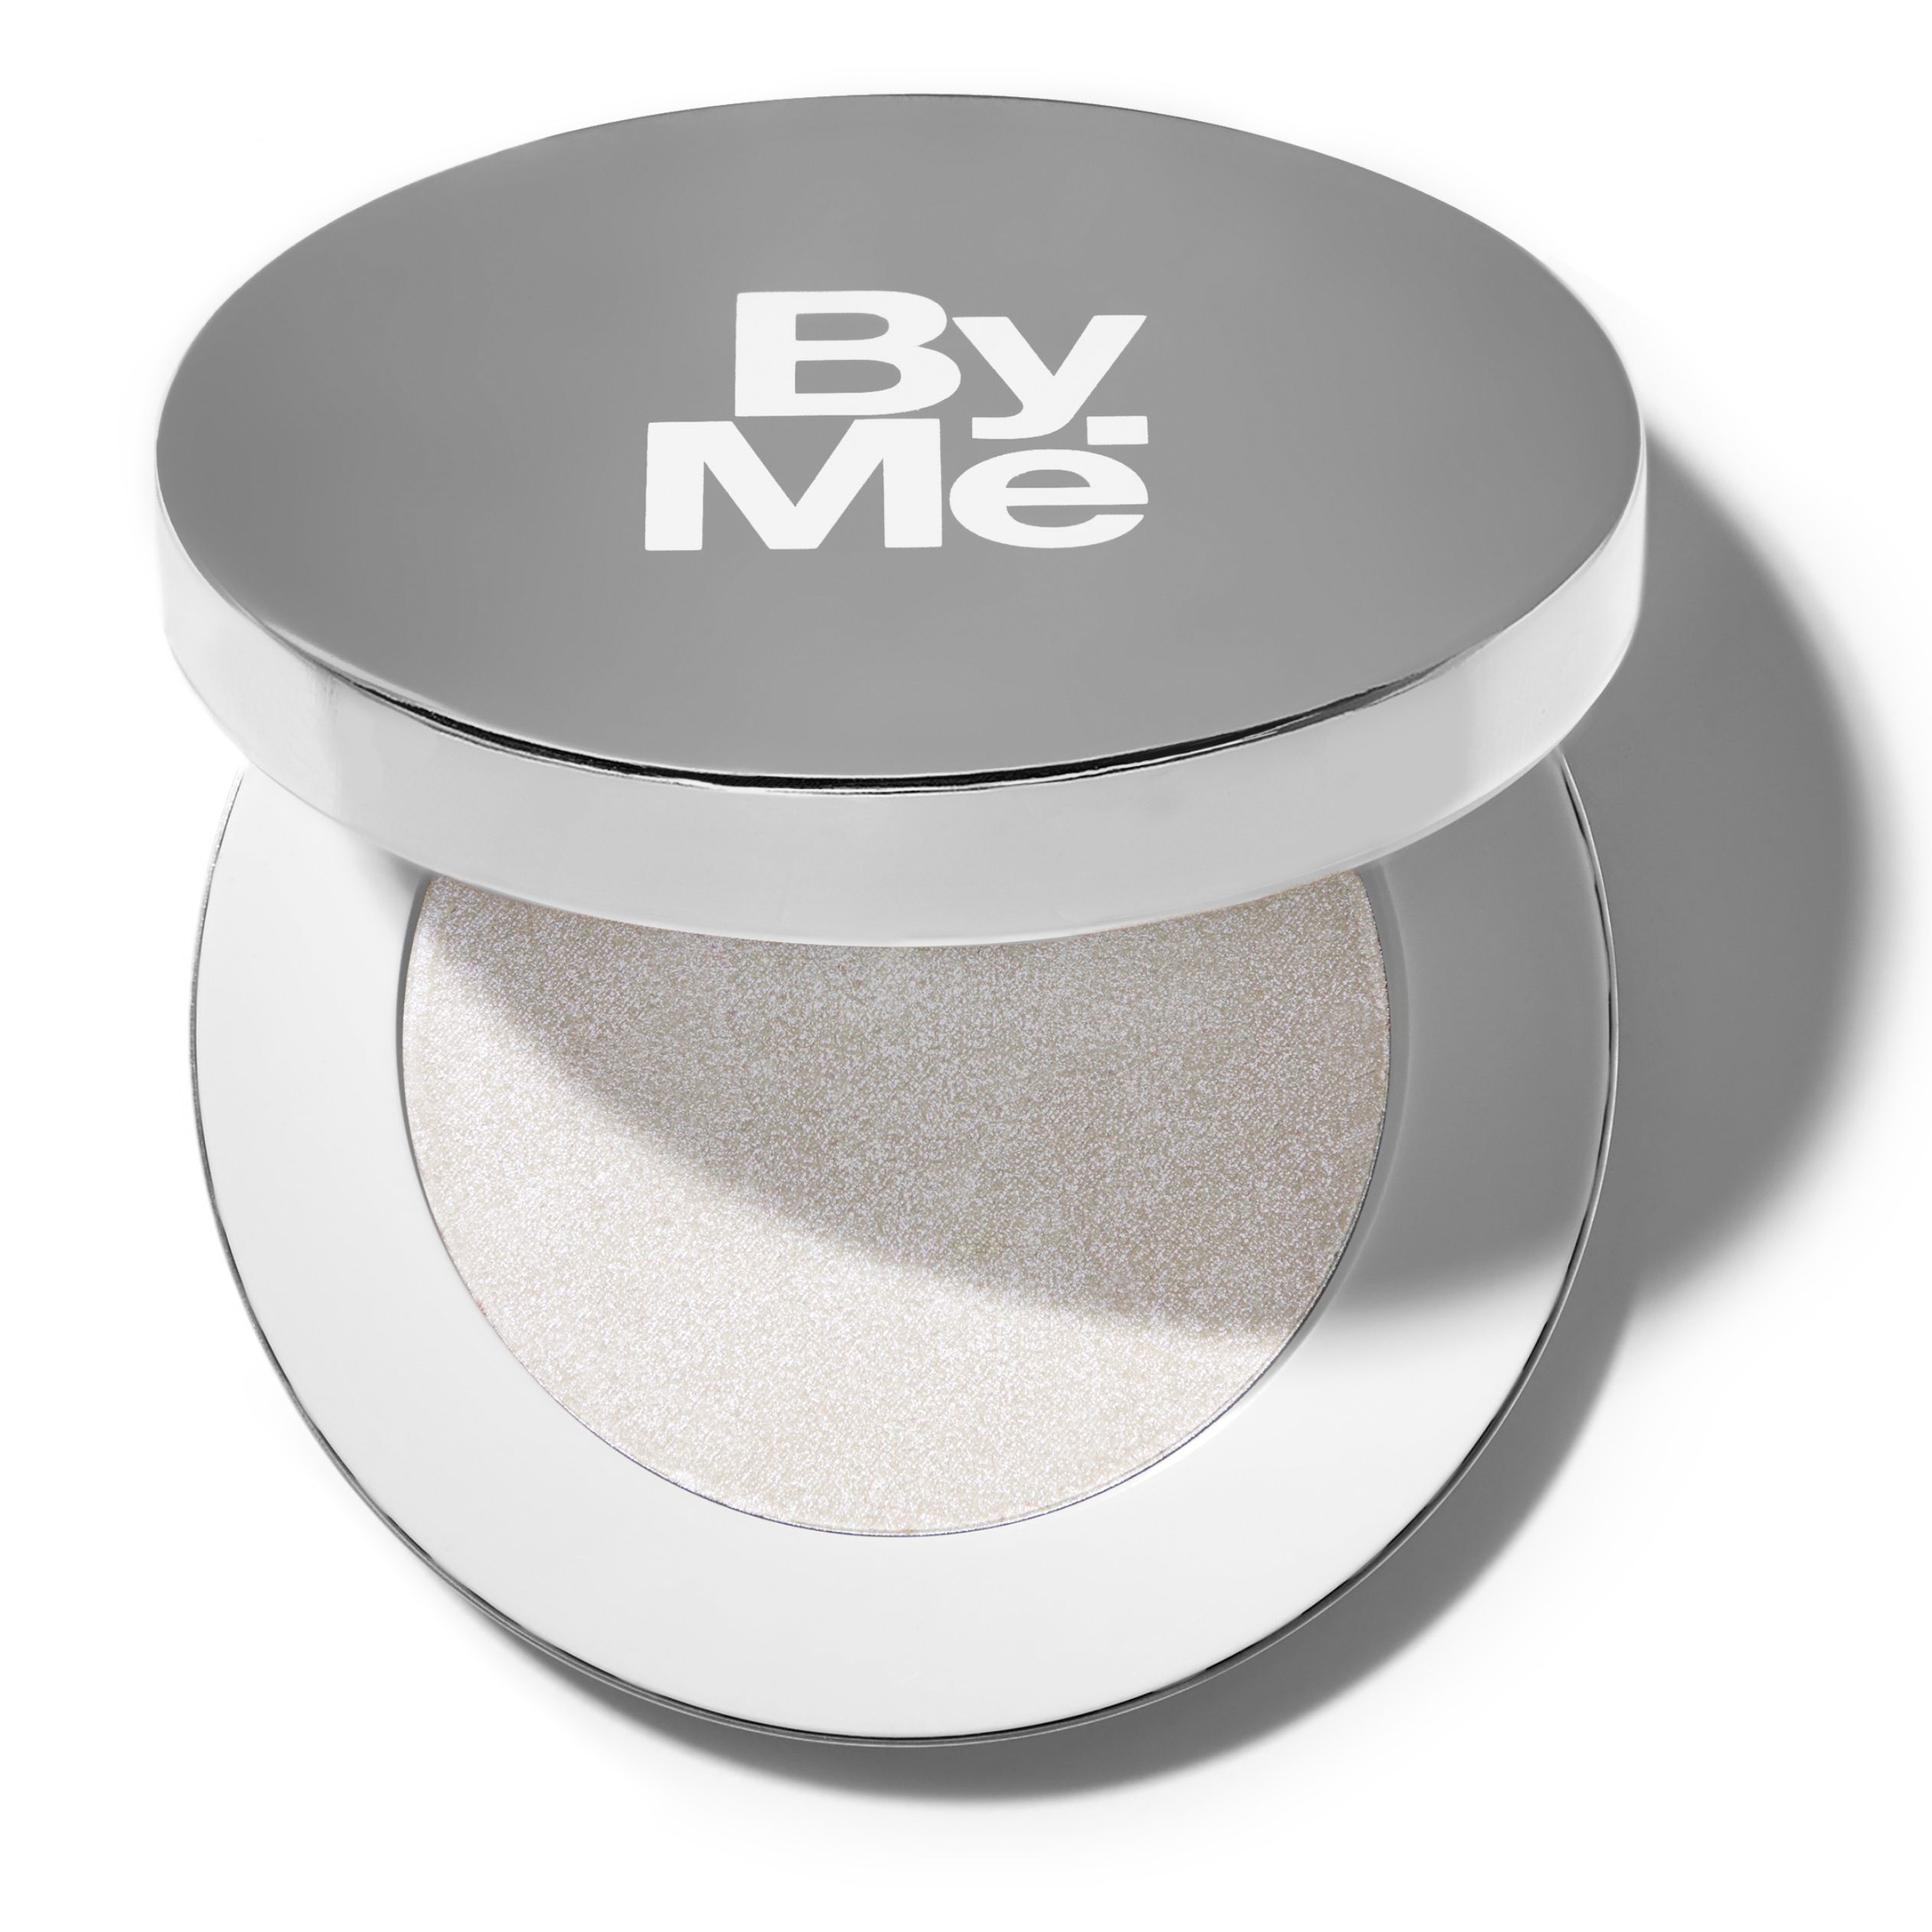 Add a luminous, iridescent lustre to face, lips and eyes. Our innovative highlighters are loaded with light reflecting mica and hyaluronic to plump up skin and blur lines for a soft focus finish, and all-day glow up.

– Show stopping buildable glow </p>
– Natural oils for smooth application </p>
– Powder-to-cream finish </p>
– Flatters every skin tone </p>
– Hyaluronic acid plumps skin </p>– Talc & paraben-free </p>
– 100% Vegan </p><br></p>
– “Highlighter never looks dry or patchy and applies smoothly.” - VOGUE